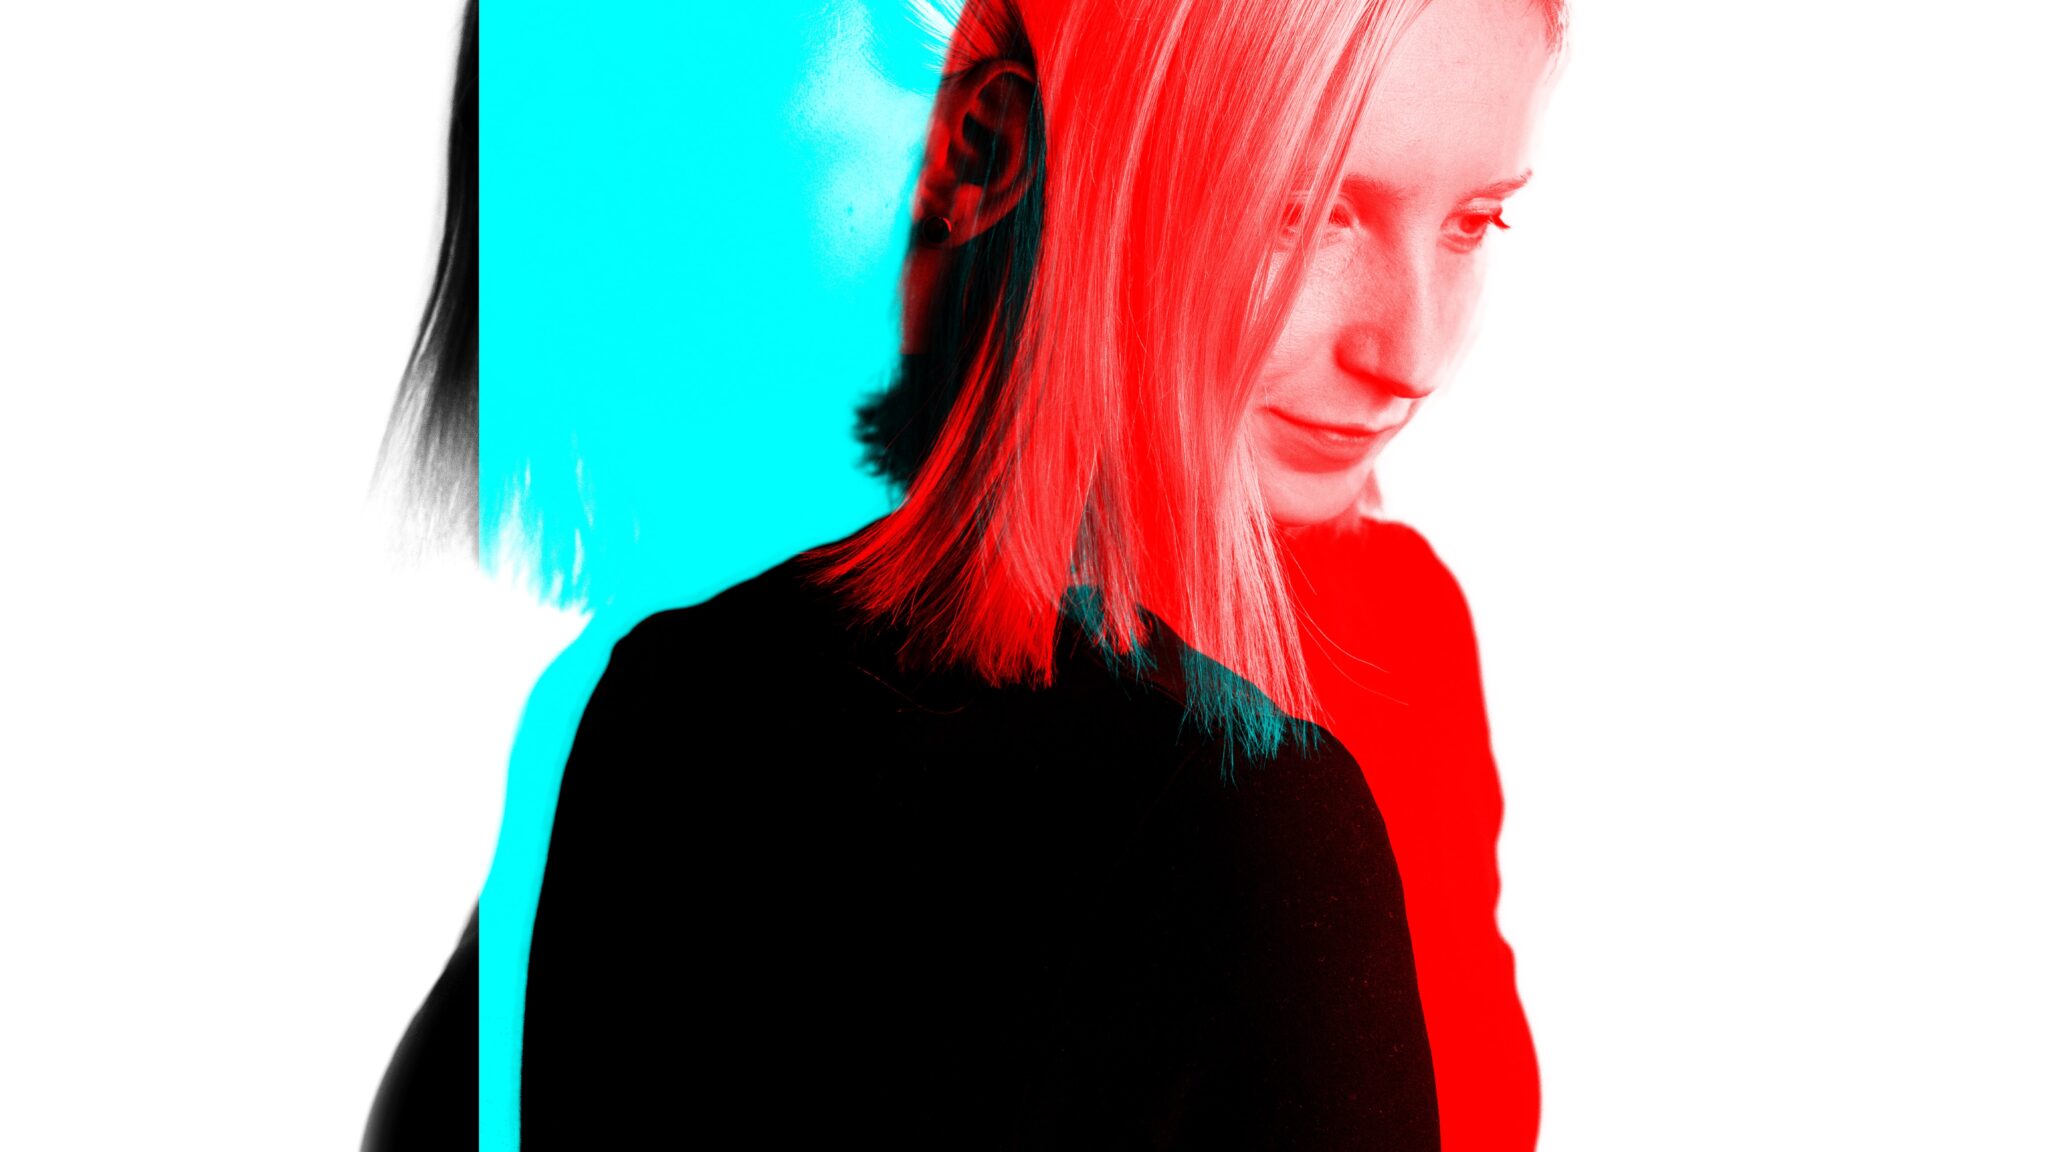 A double exposure image of a woman in red and blue